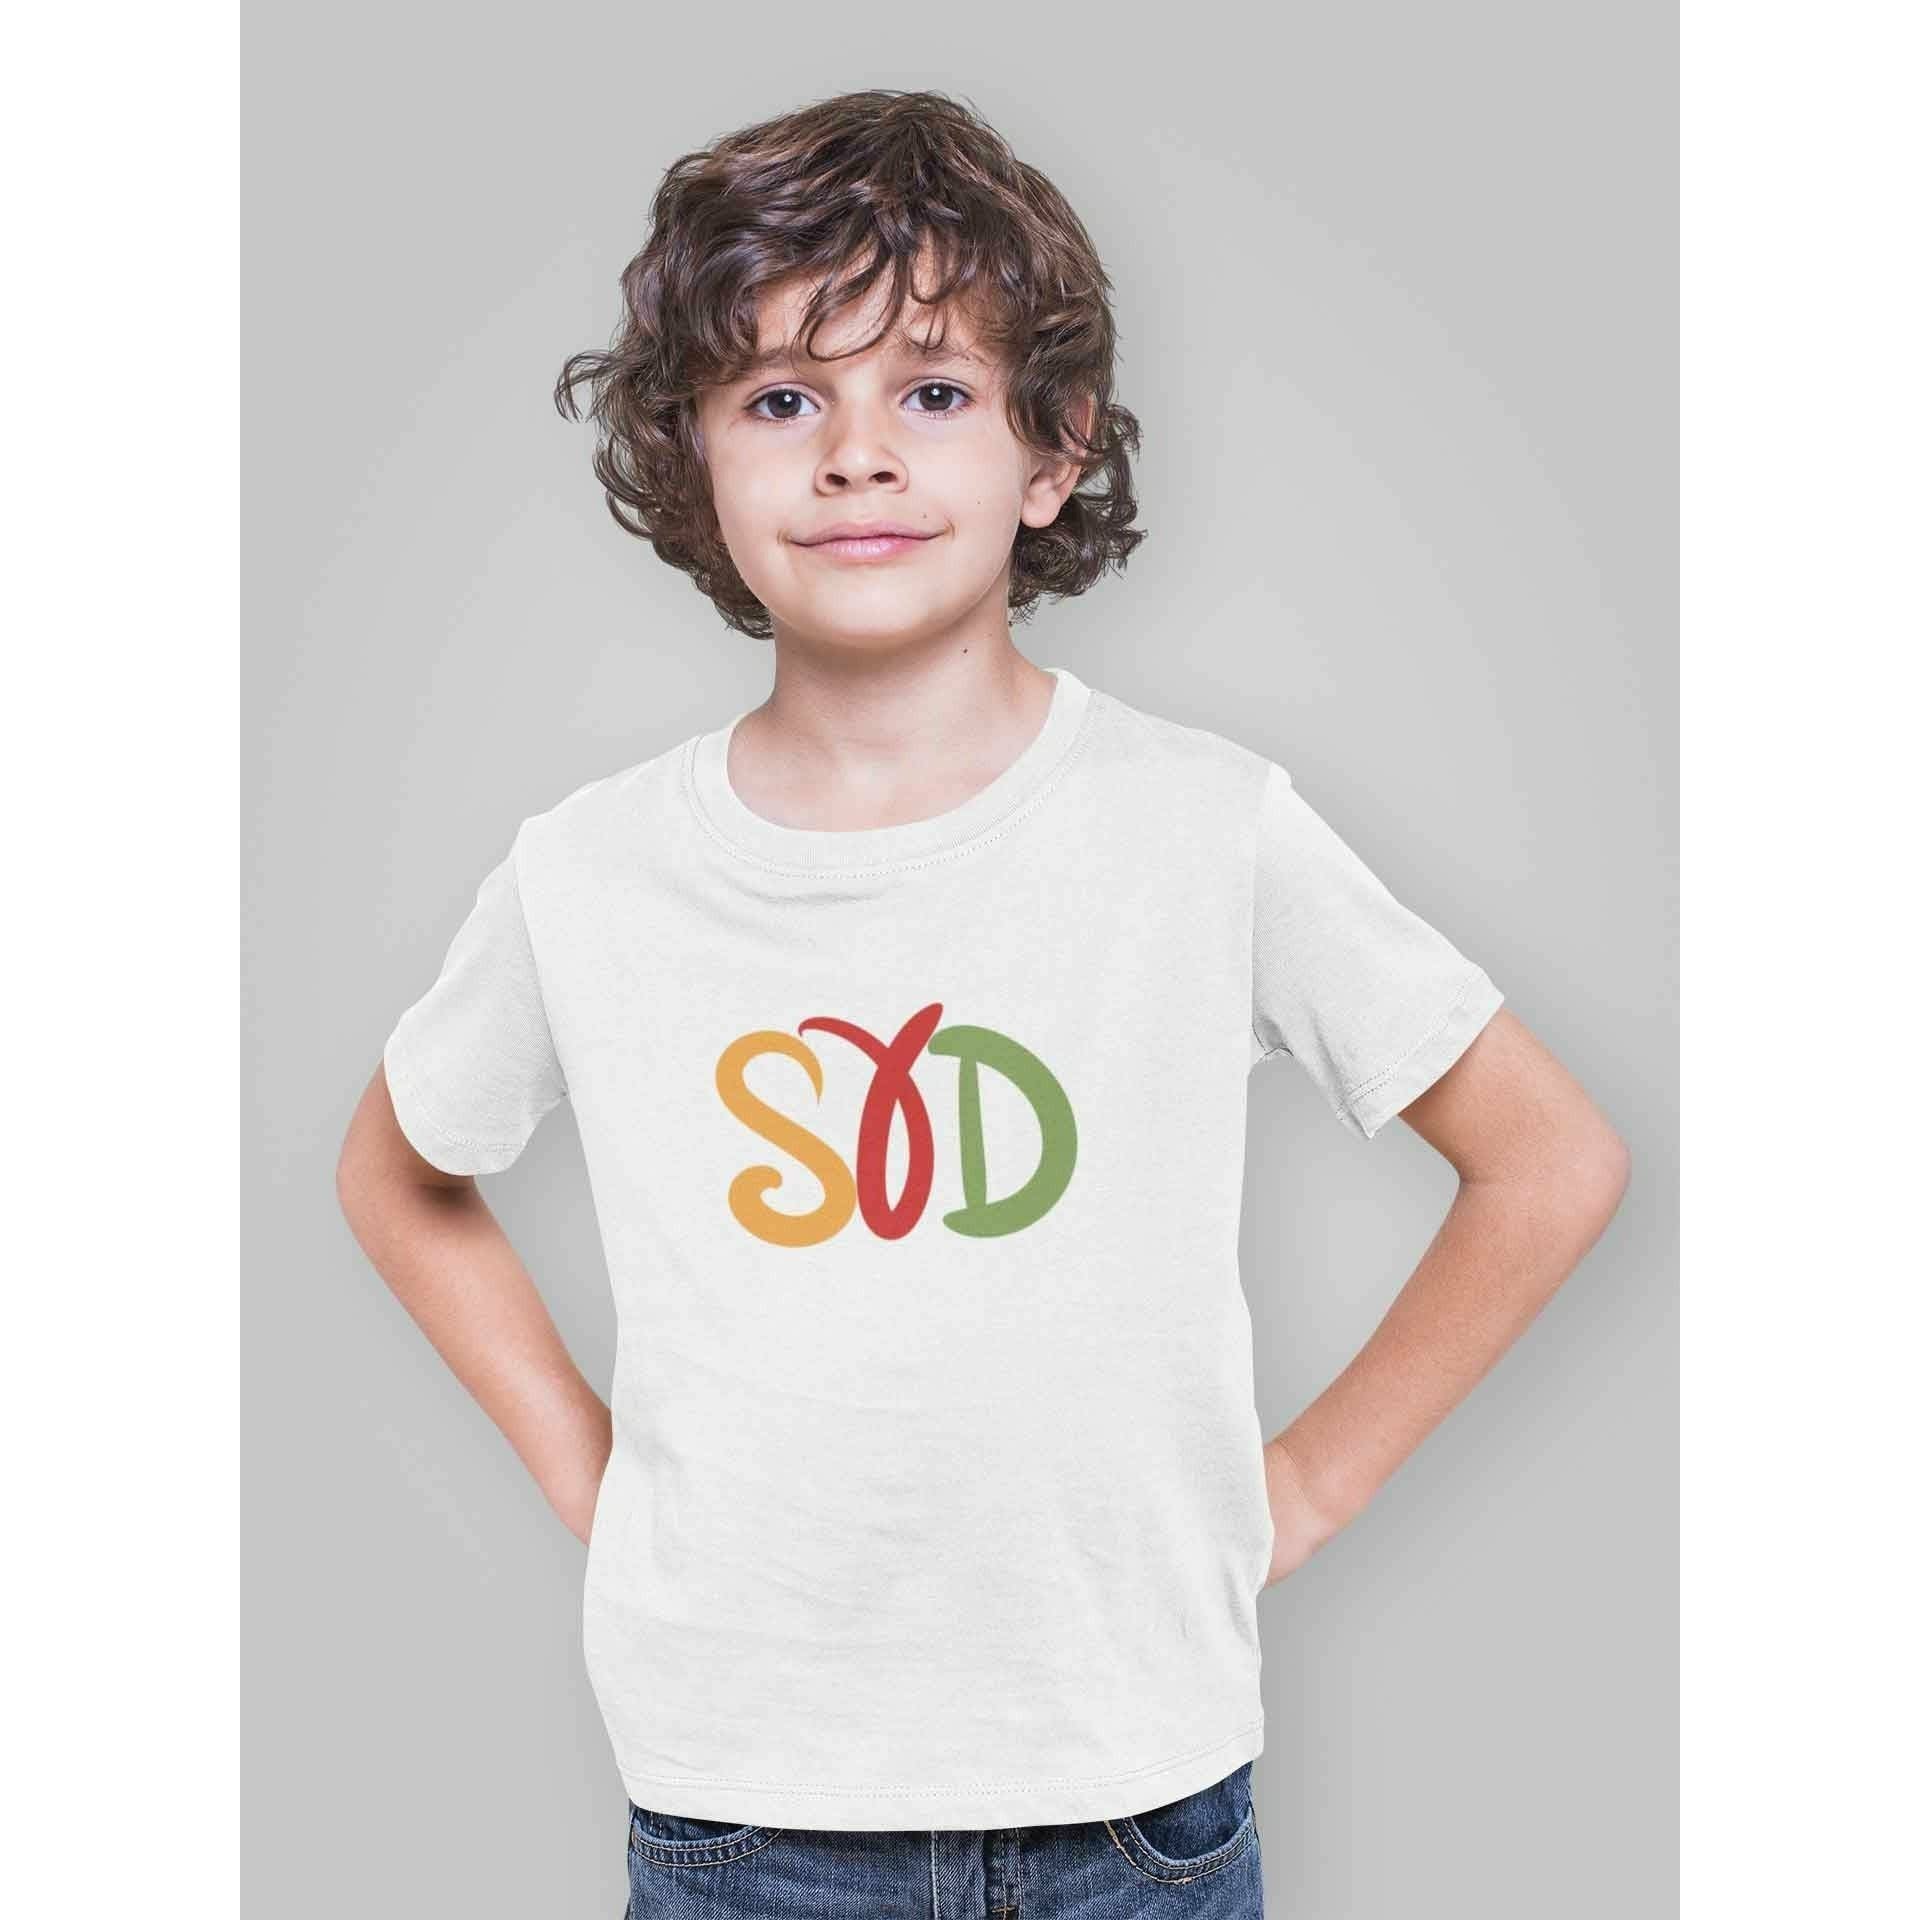 SYD Kids Youth Crew T-Shirt - Sunny Sydney Australia - Famous Outdoor Gear Store